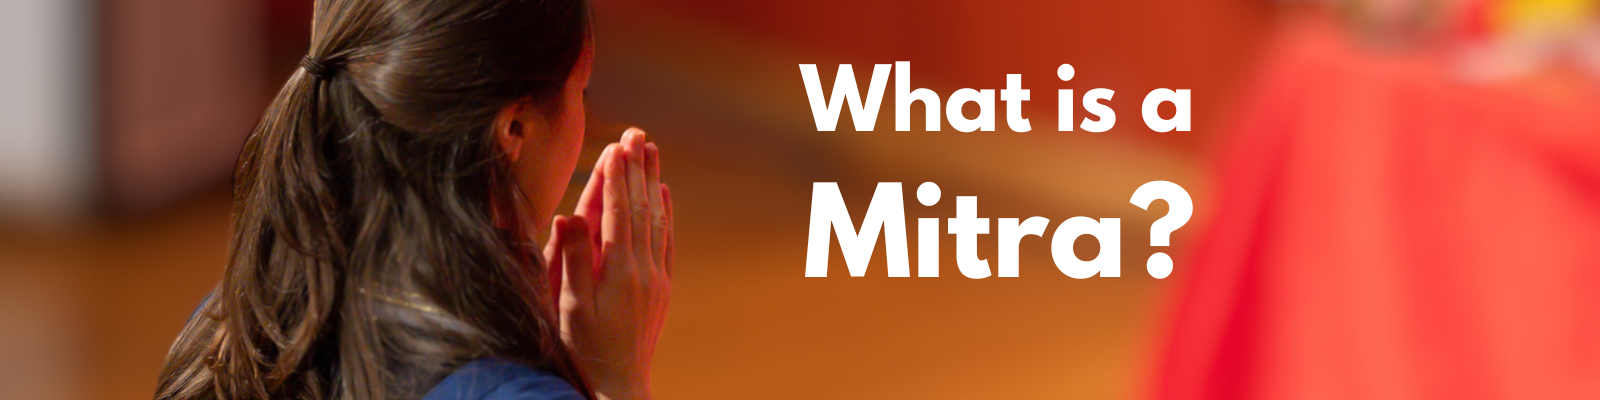 What is a Mitra?